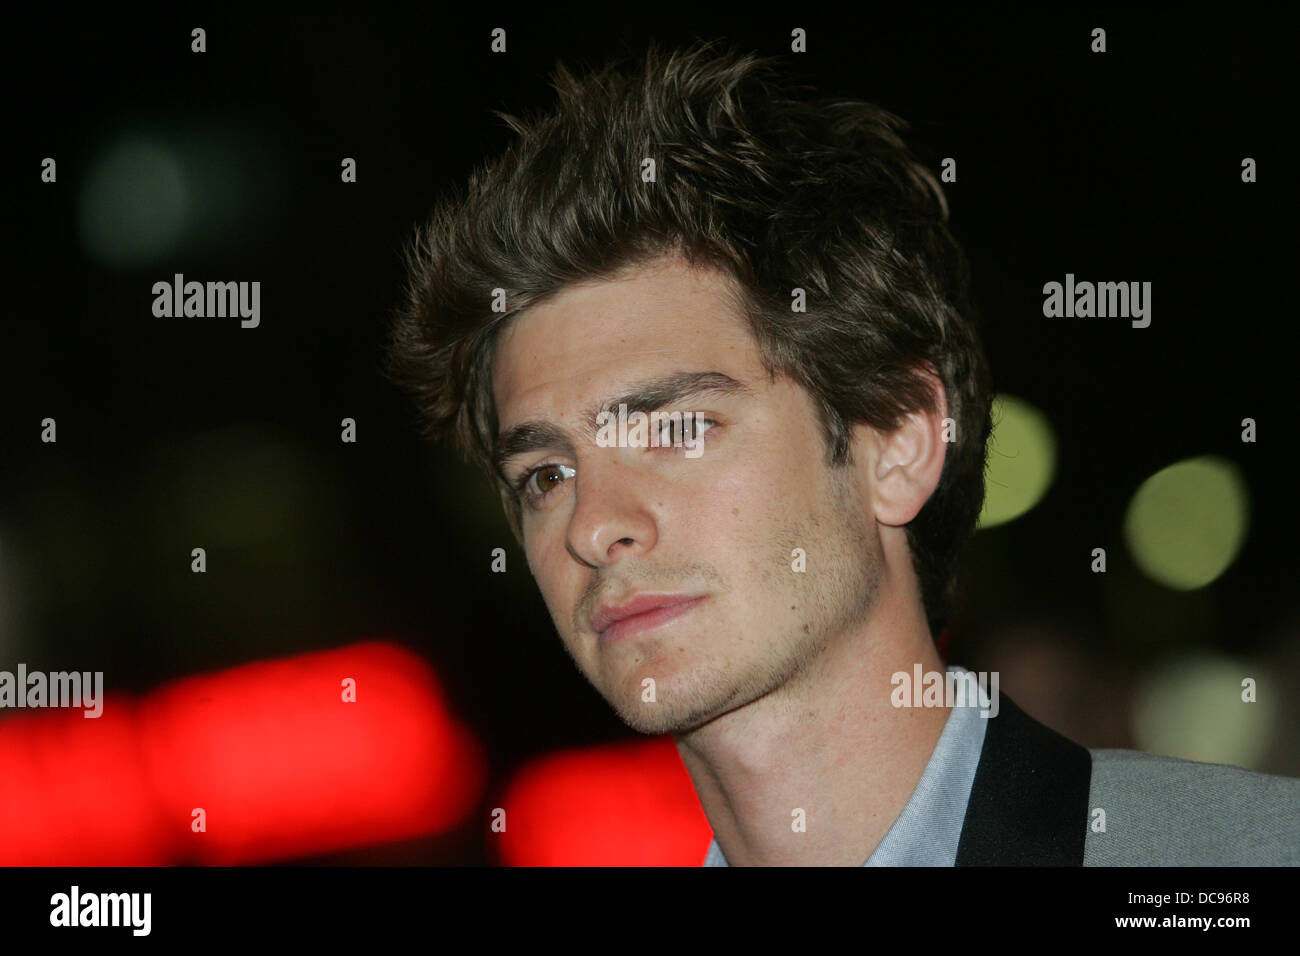 Actor Andrew Garfield poses for photographers as he arrives for the British premiere of 'The Imaginarium of Doctor Parnassus' at Stock Photo